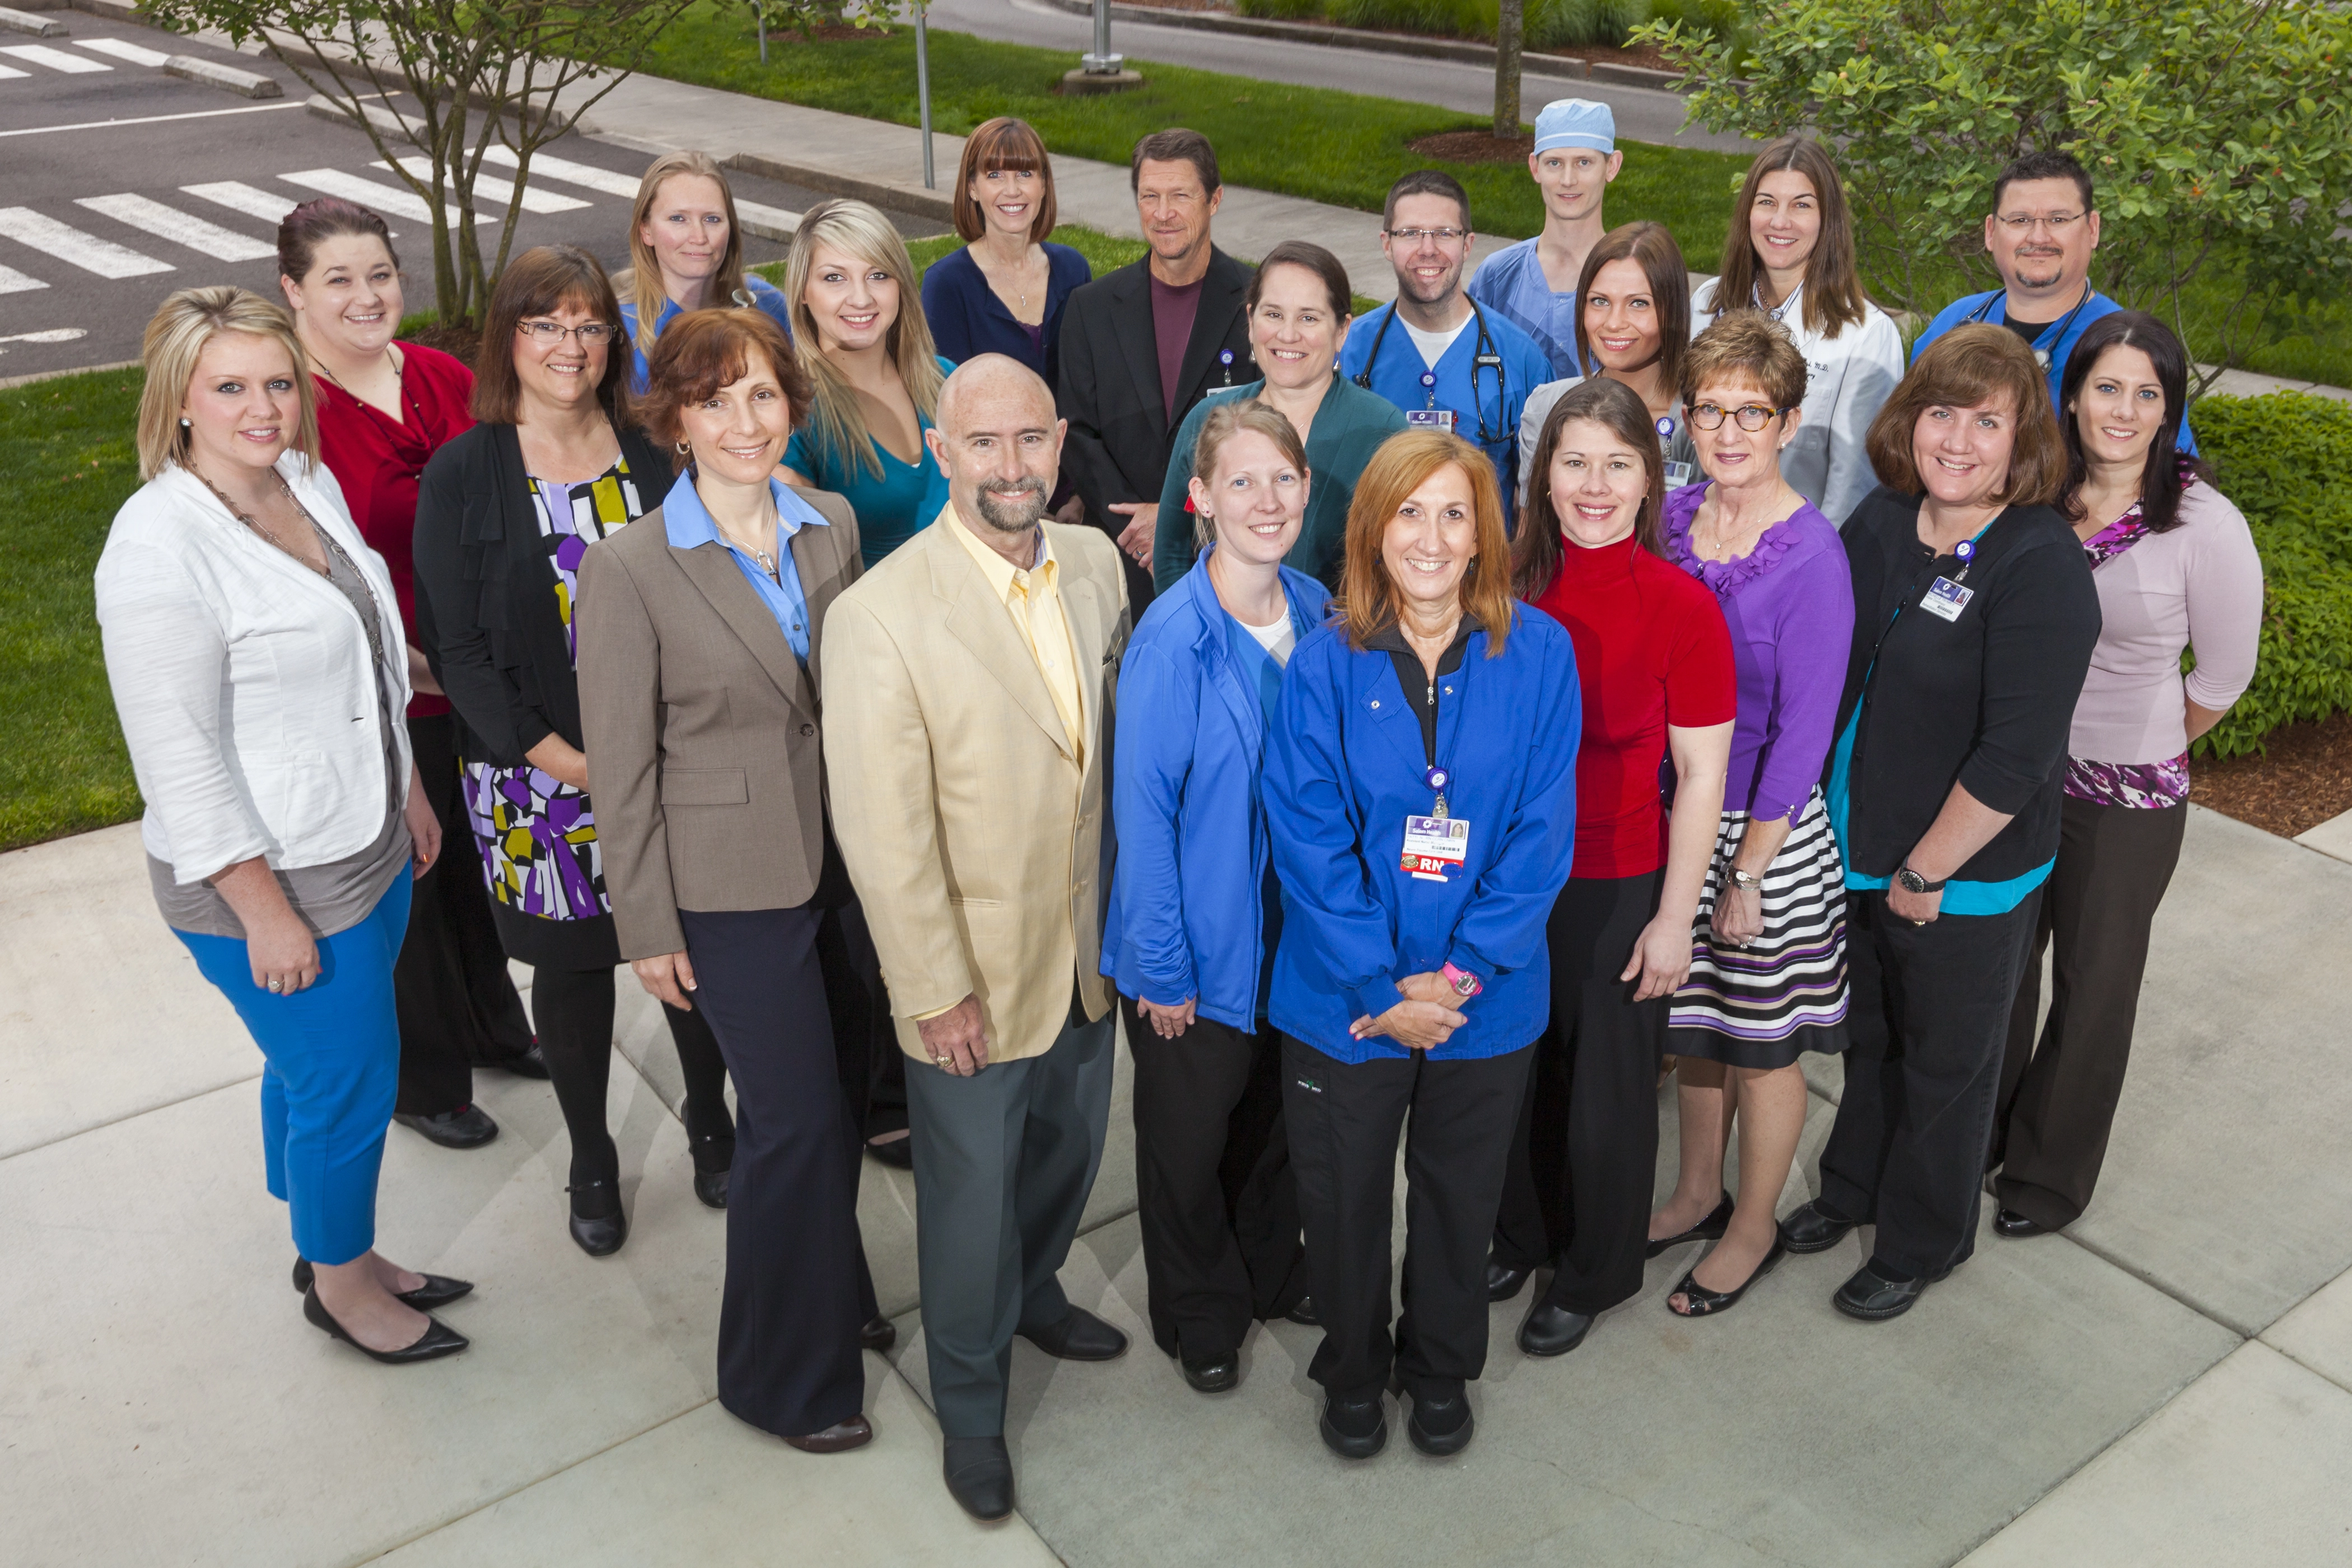 Group photo of the staff of the Salem Health Spine Center.